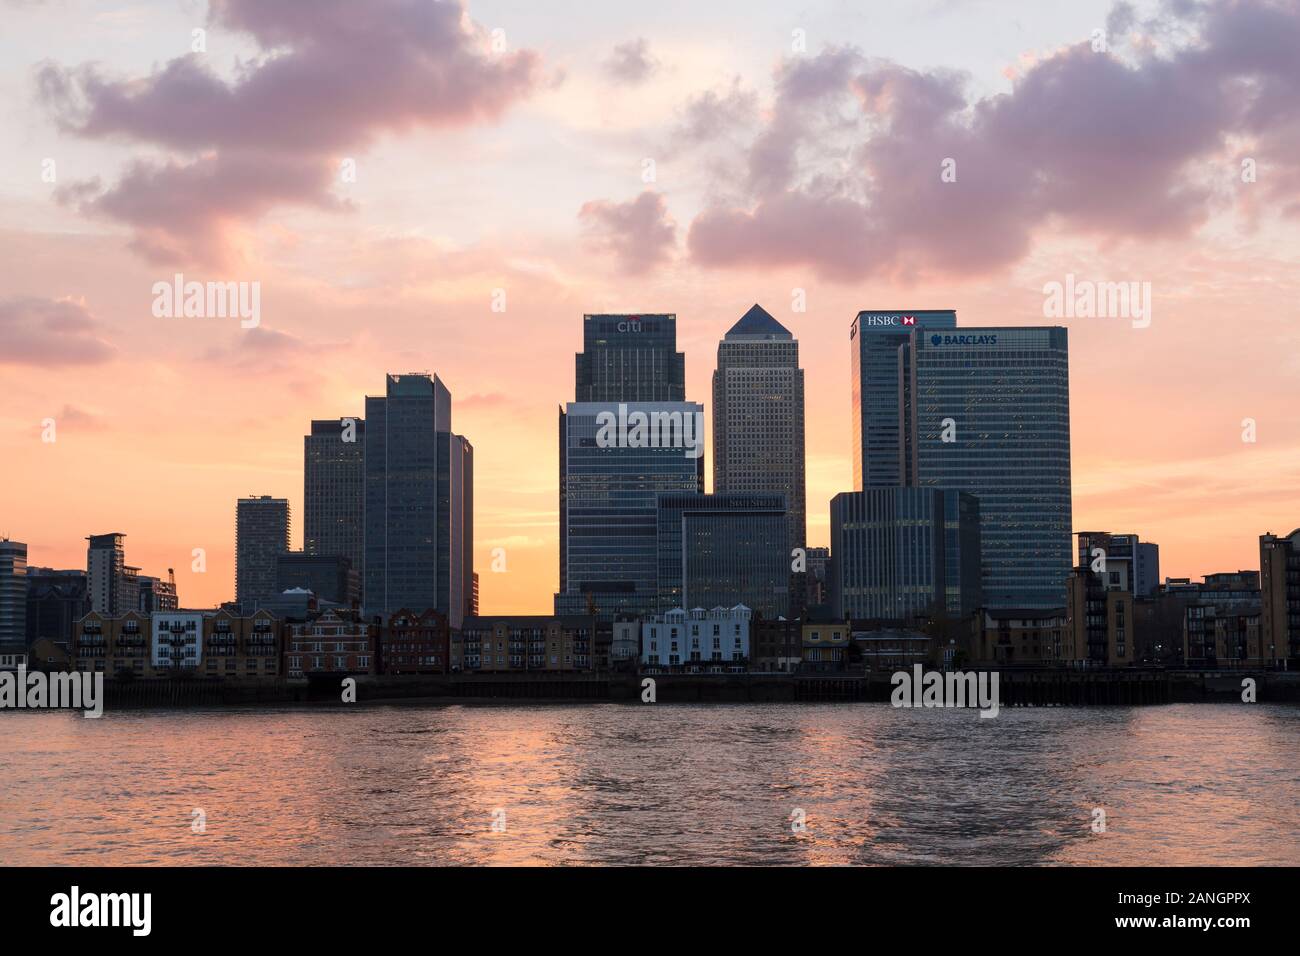 London skyline business district at sunset, Canary Wharf, England Stock Photo